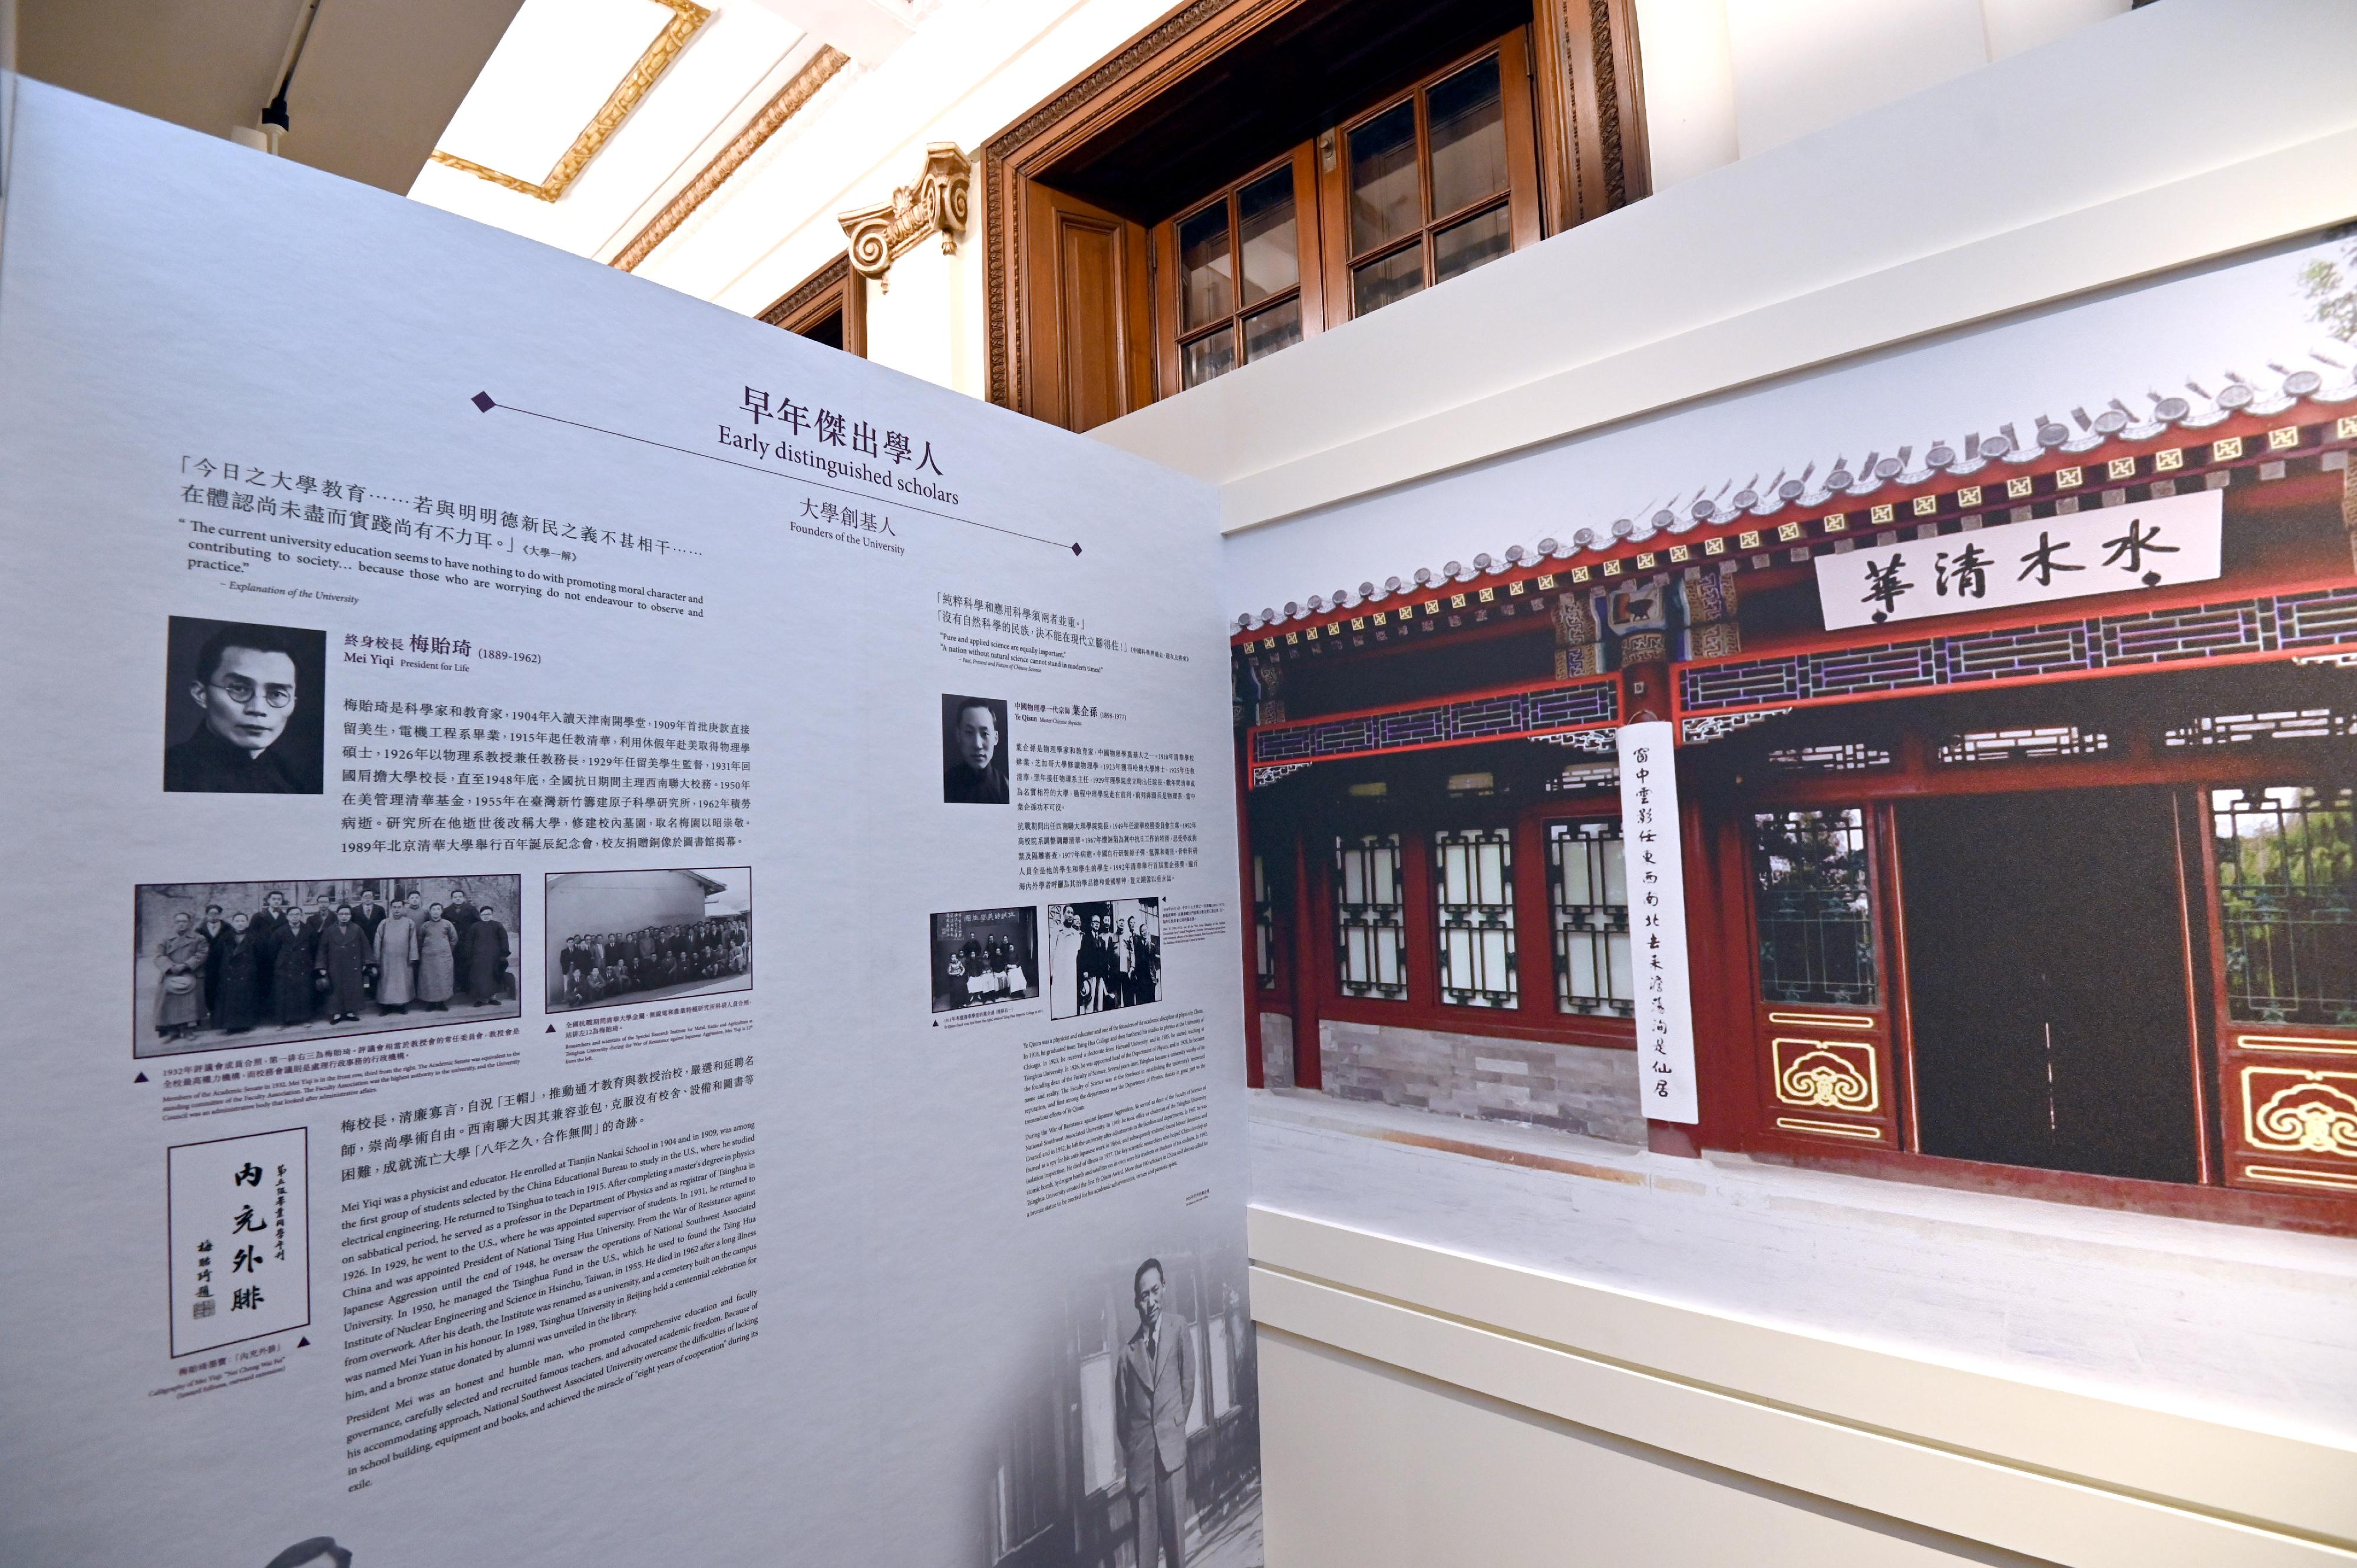 Co-organised by the Leisure and Cultural Services Department and the Tsinghua University History Museum, the "Self-discipline and Social Commitment: People and Stories of Tsinghua University" Special Exhibition will run from today (January 26) until May 31 at the Dr Sun Yat-sen Museum.